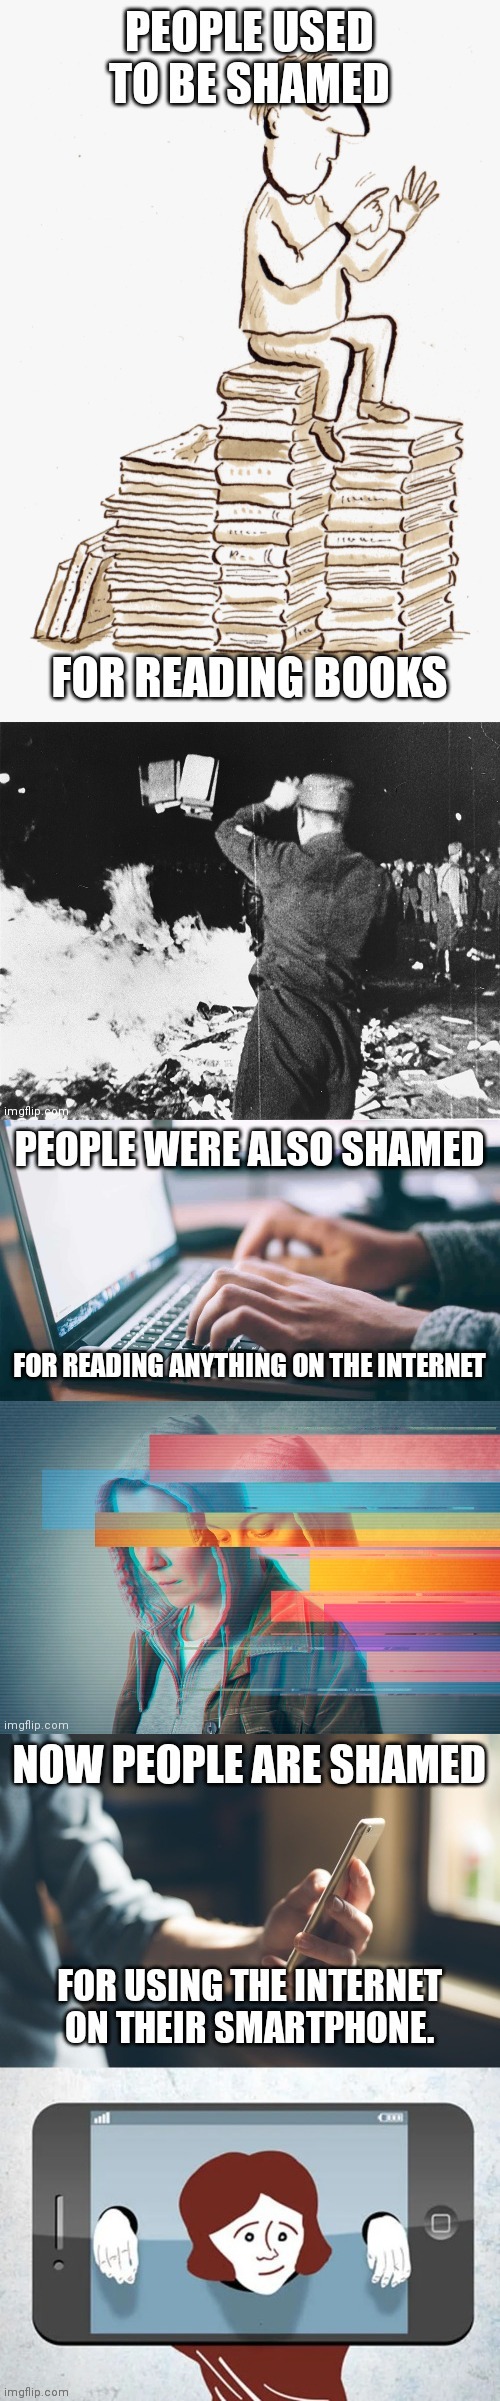 Stop shaming people for reading | image tagged in shame,books,internet,smartphone | made w/ Imgflip meme maker